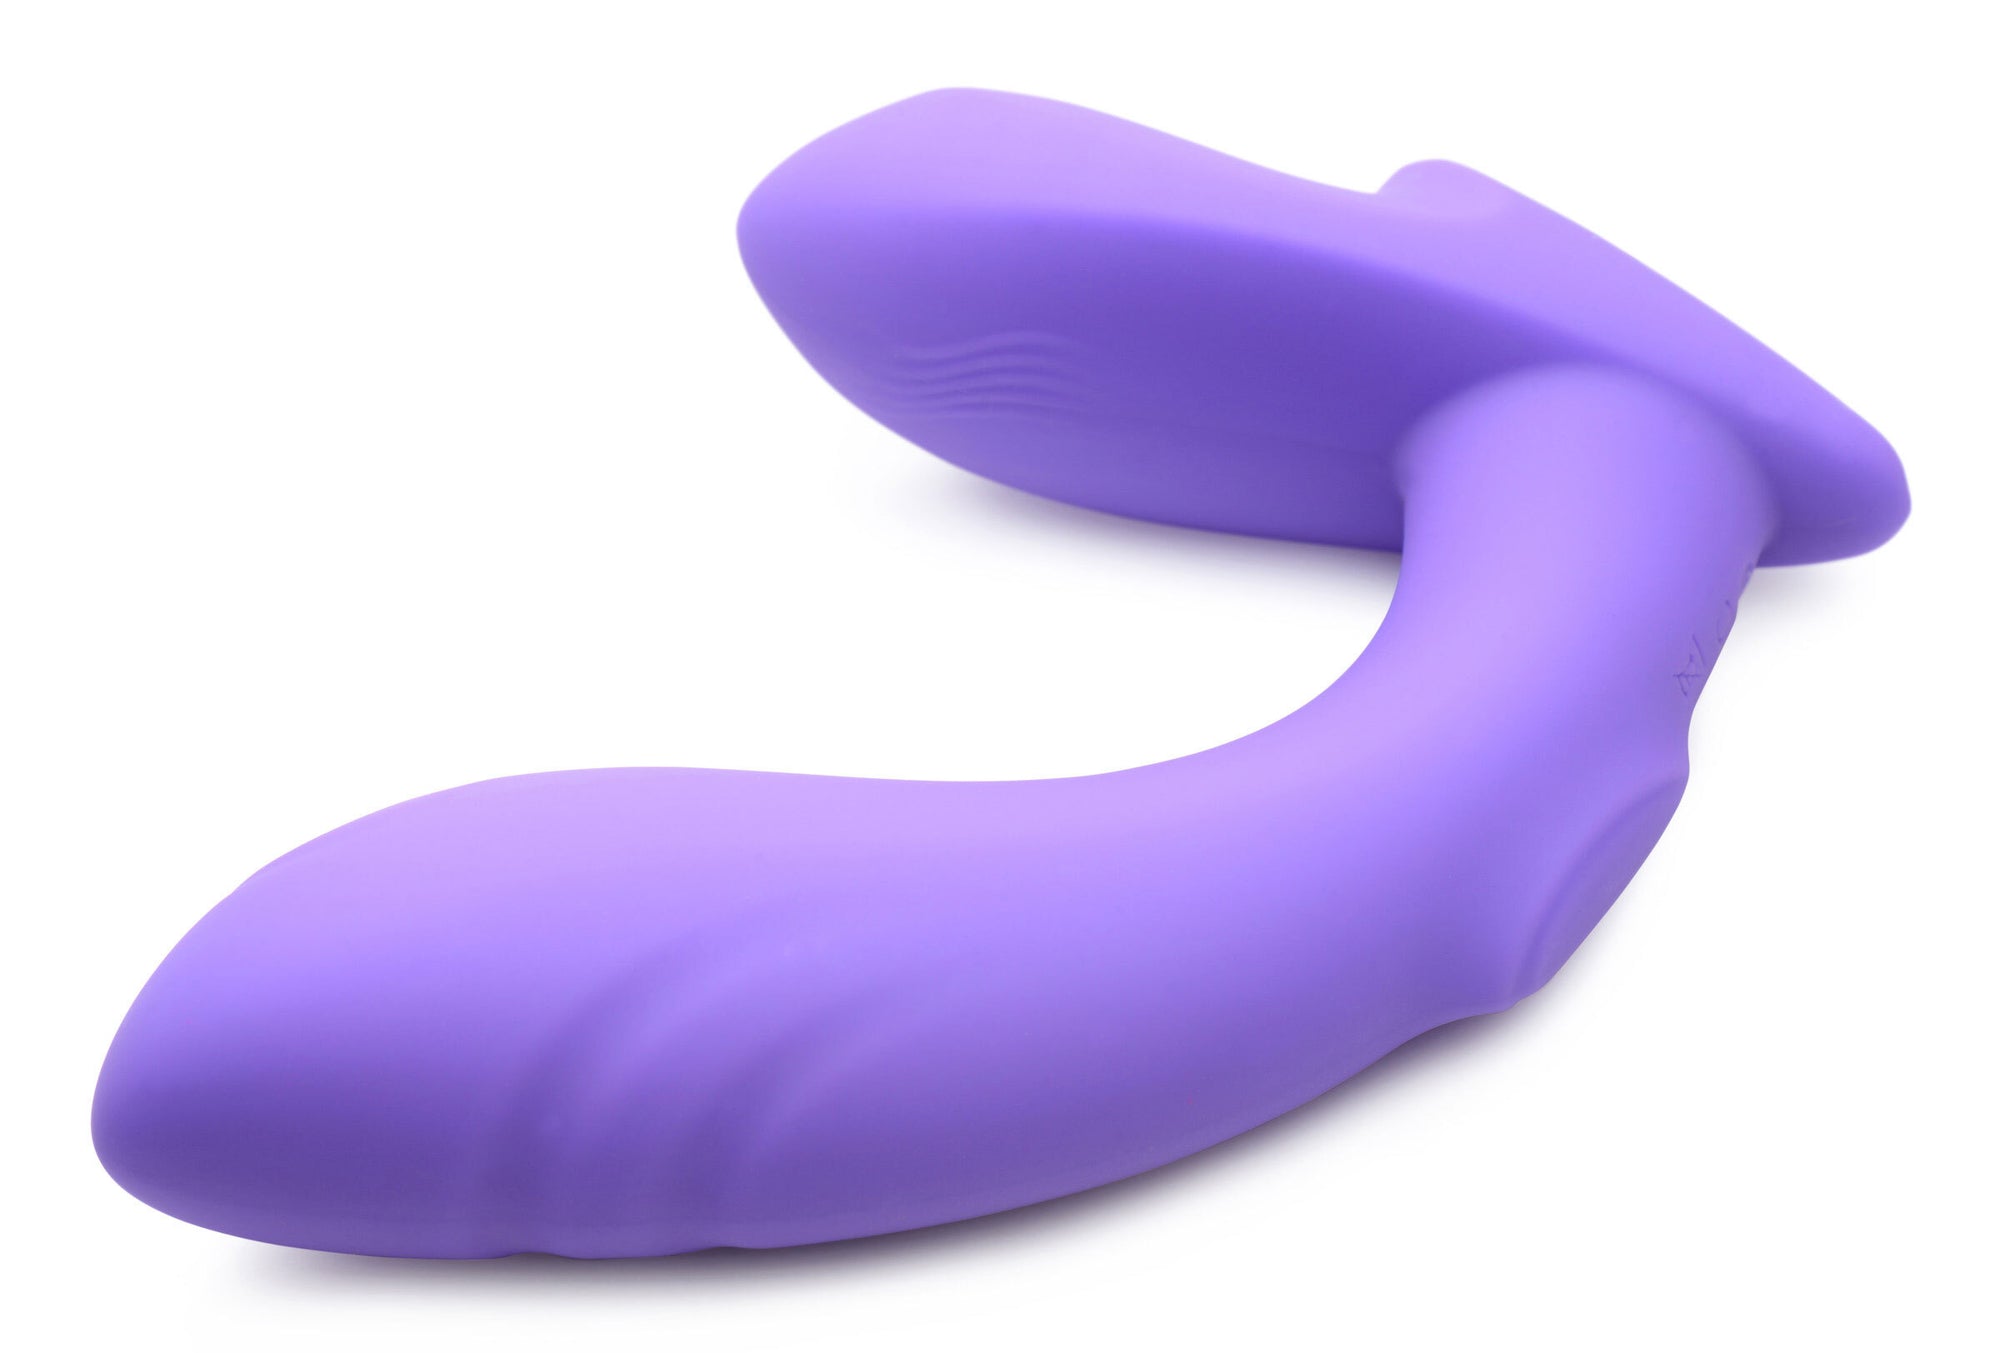 10x G-Tap Tapping Silicone G-Spot Vibrator - Purple
Enjoy an explosion of clitoral bliss! Designed for enhanced grip and equipped with a powerful sucking feature to thrill and please. 7 sucking intensity levels. discreet vibrators, hot sellers, sex toys
Remote Controlled Stimulators